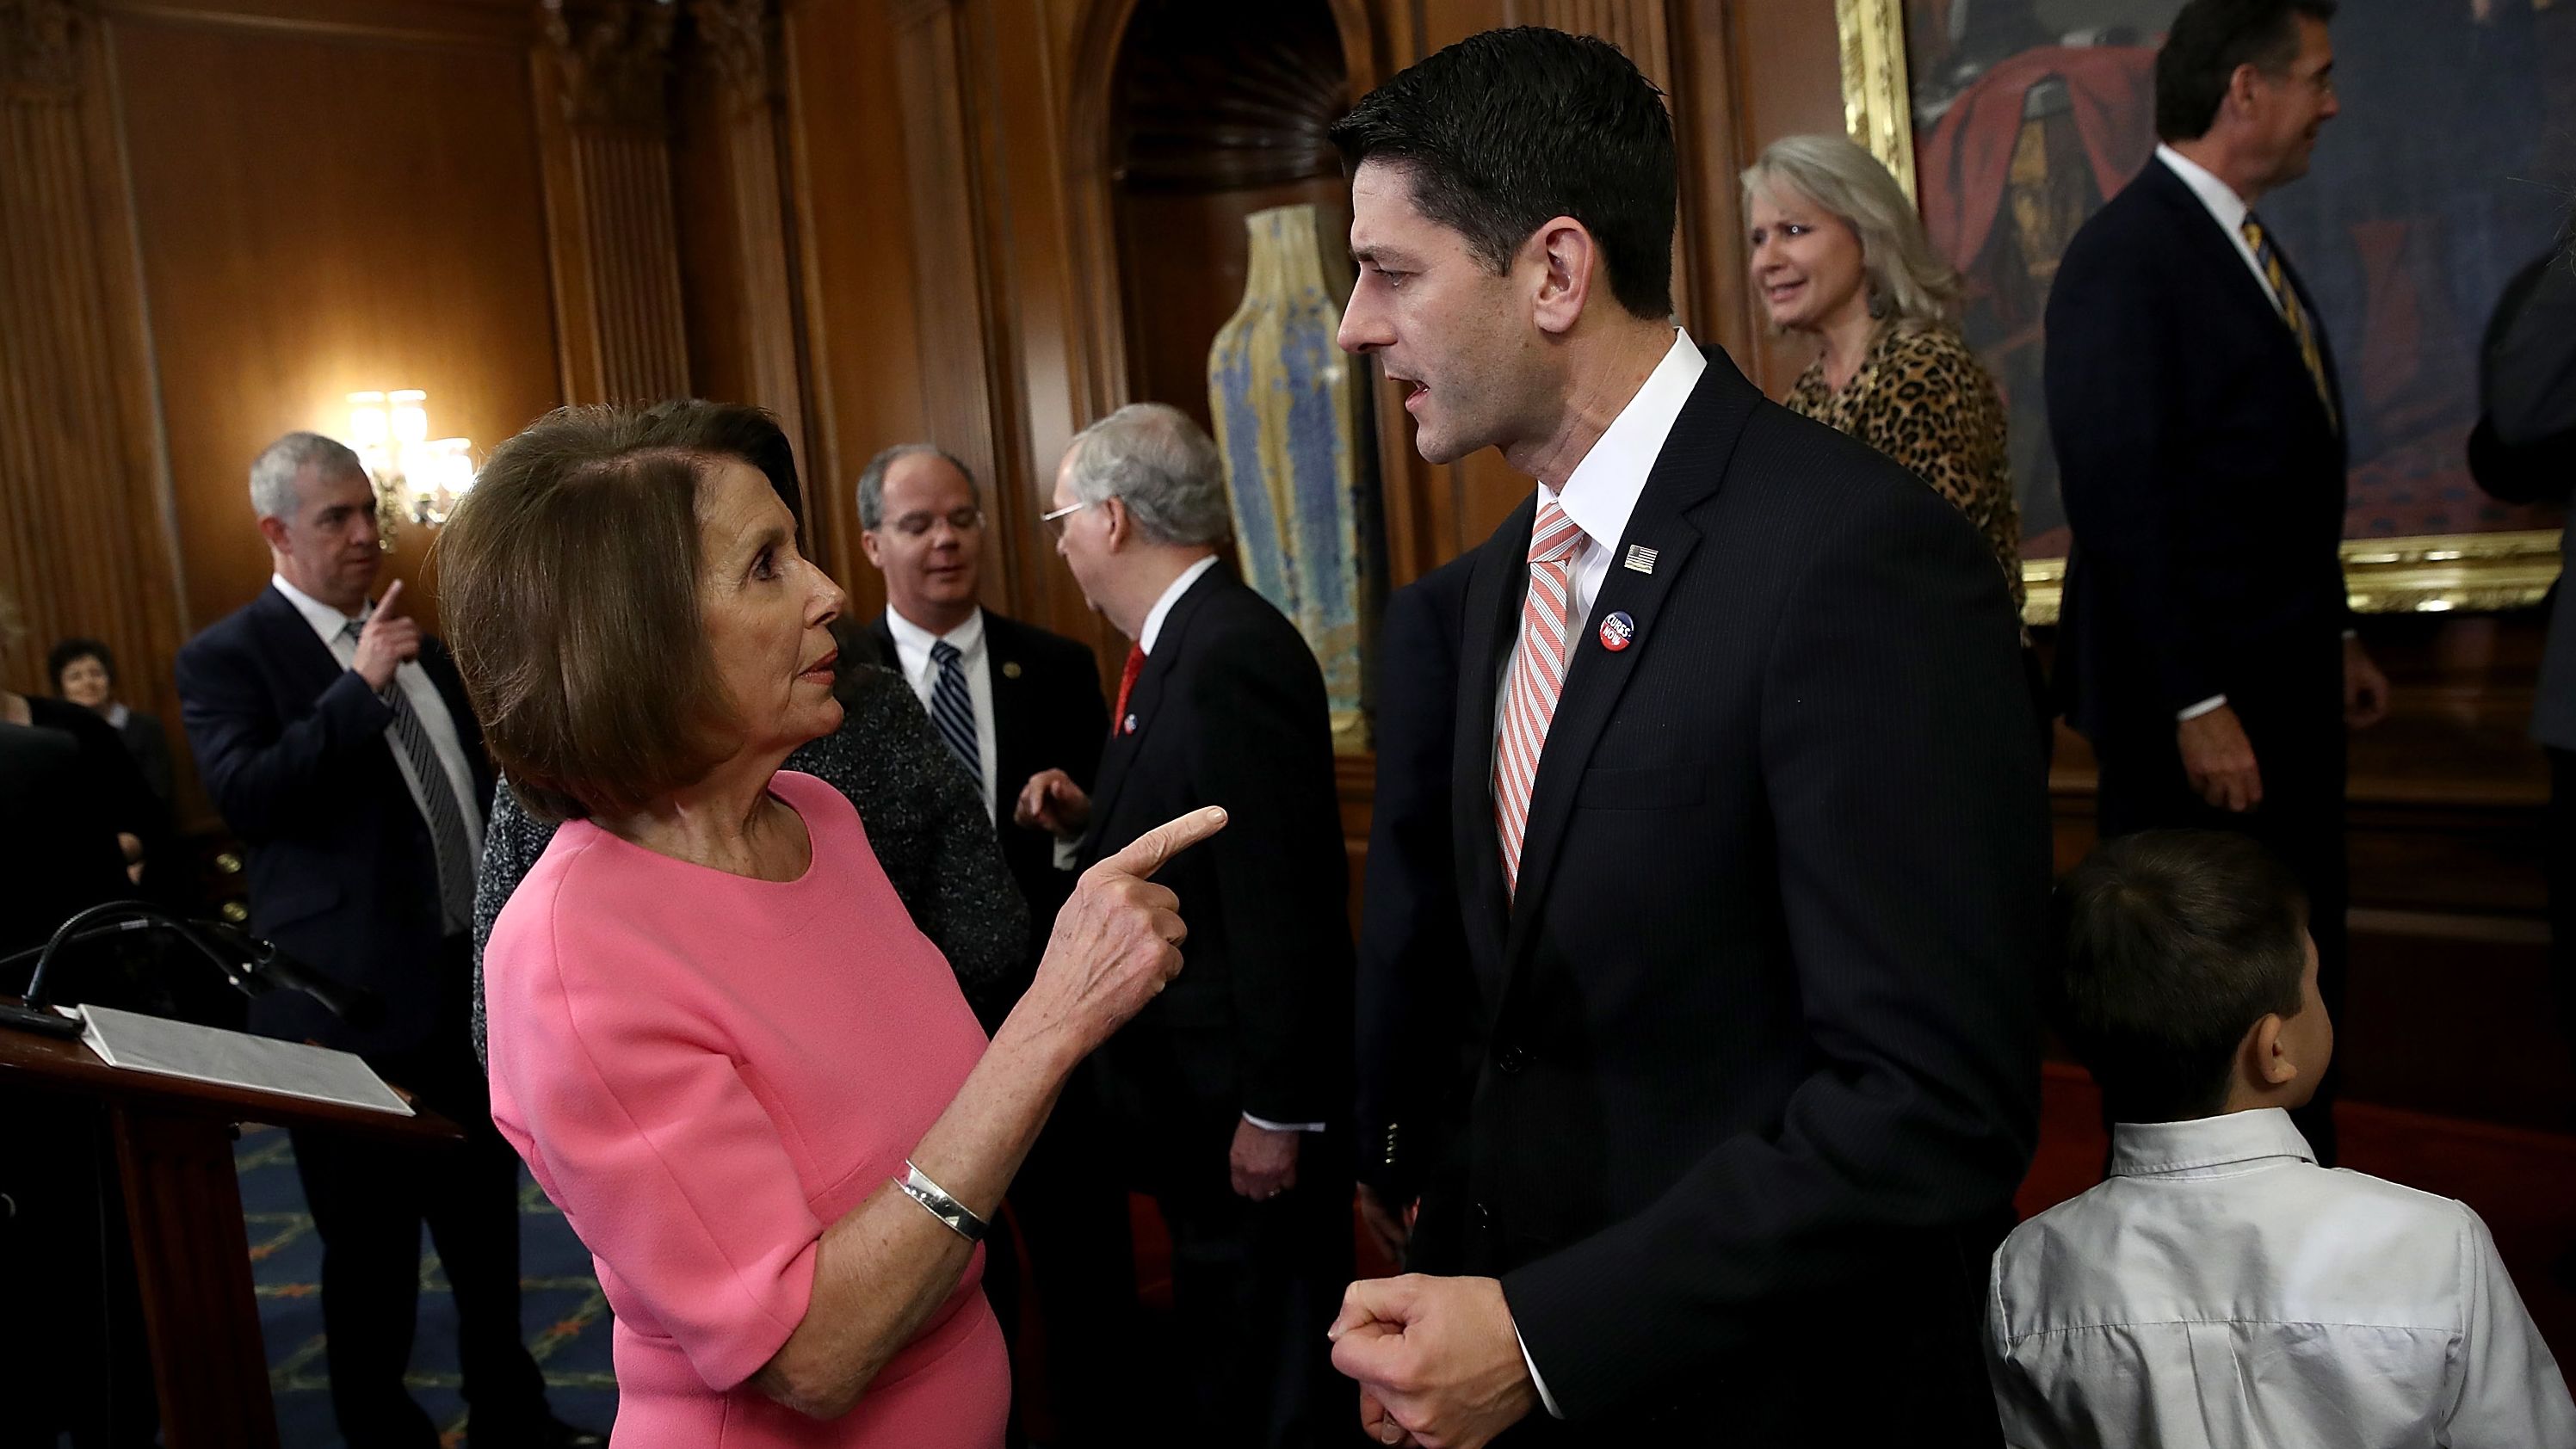 U.S. Speaker of the House Paul Ryan (R) (R-WI) speaks with House Minority Leader Rep. Nancy Pelosi (D-CA) following an event marking the passage of the 21st Century Cures Act at the U.S. Capitol December 8, 2016 in Washington, DC. 